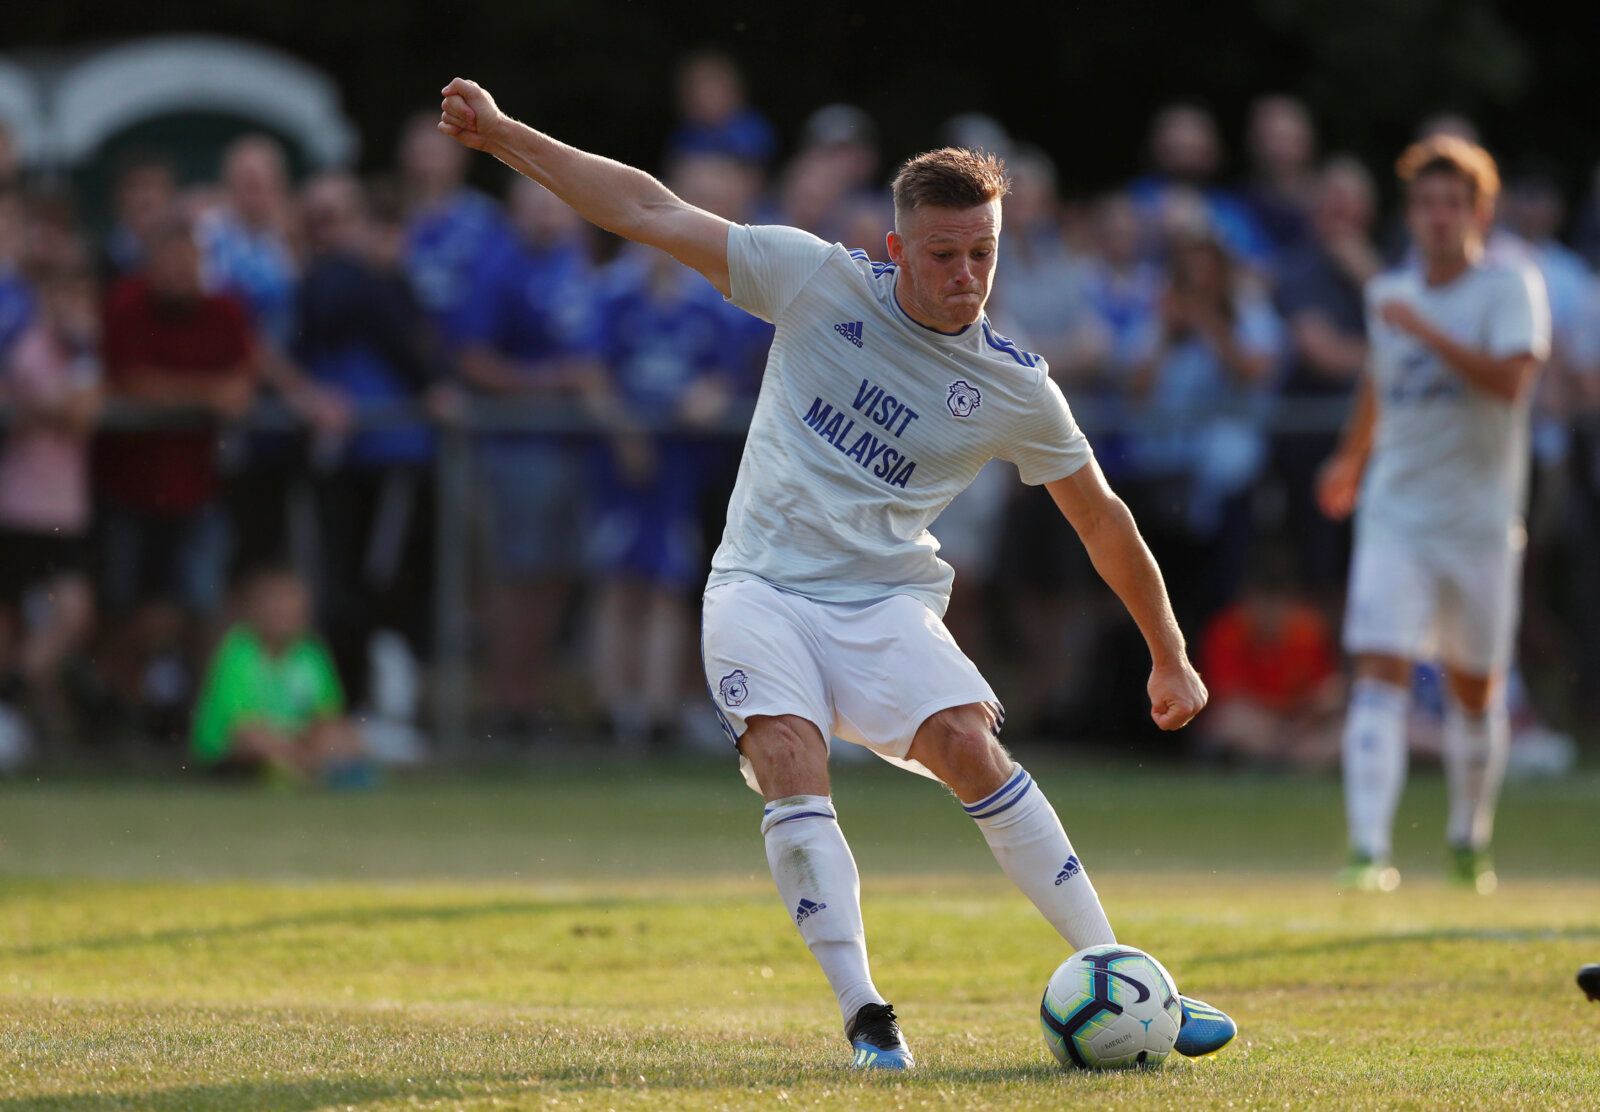 Soccer Football - Pre Season Friendly - Taff's Well v Cardiff City - Rhiw'r Ddar, Taff's Well, Britain - July 13, 2018   Cardiff City's Rhys Healey scores their second goal     Action Images via Reuters/Matthew Childs